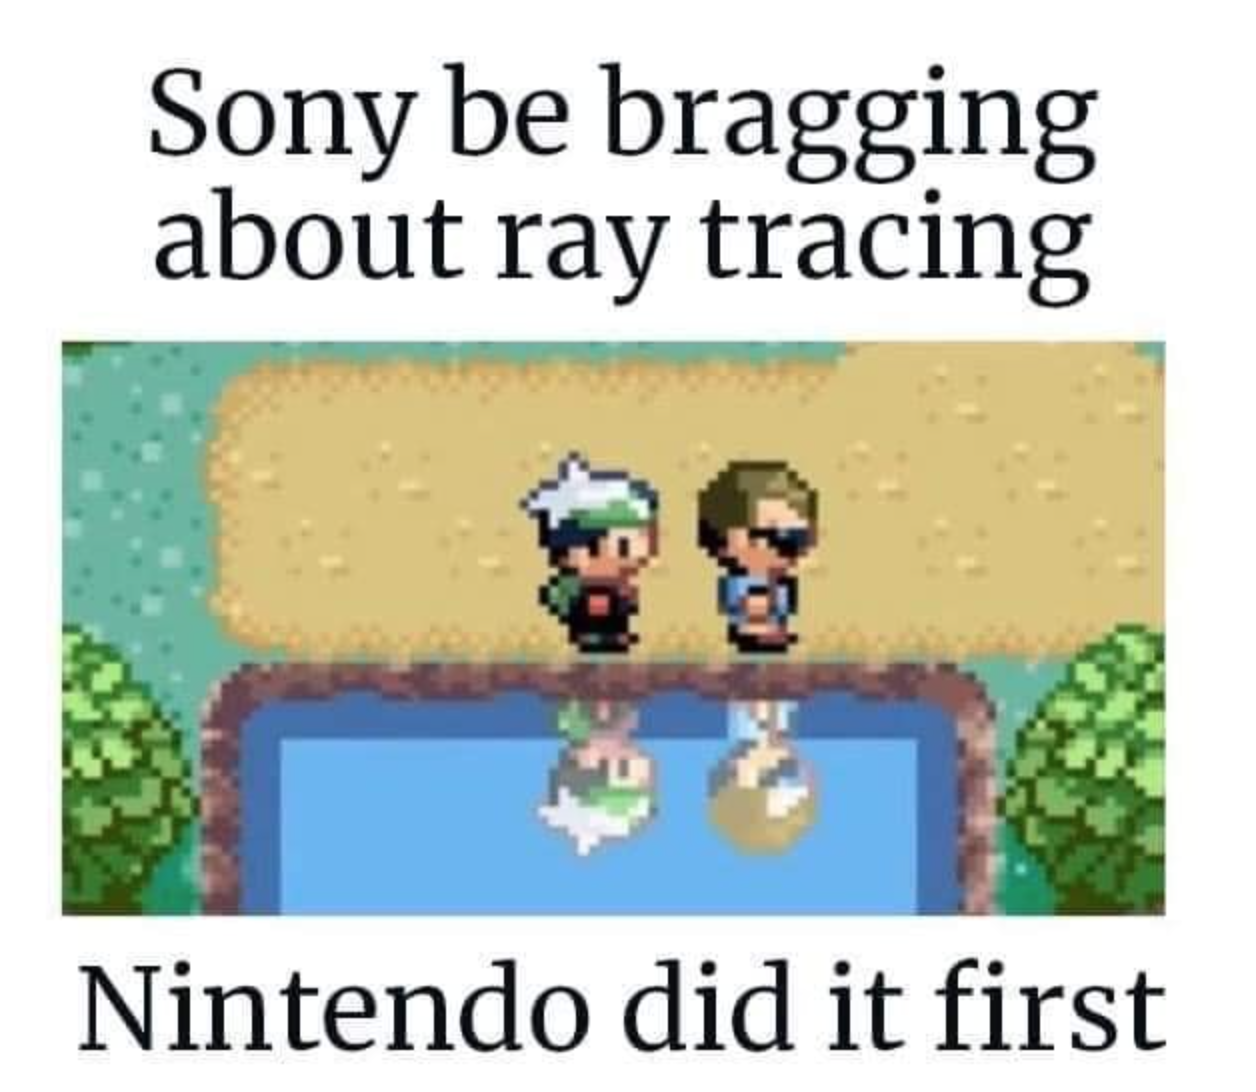 nintendo ray tracing meme - Sony be bragging about ray tracing Nintendo did it first